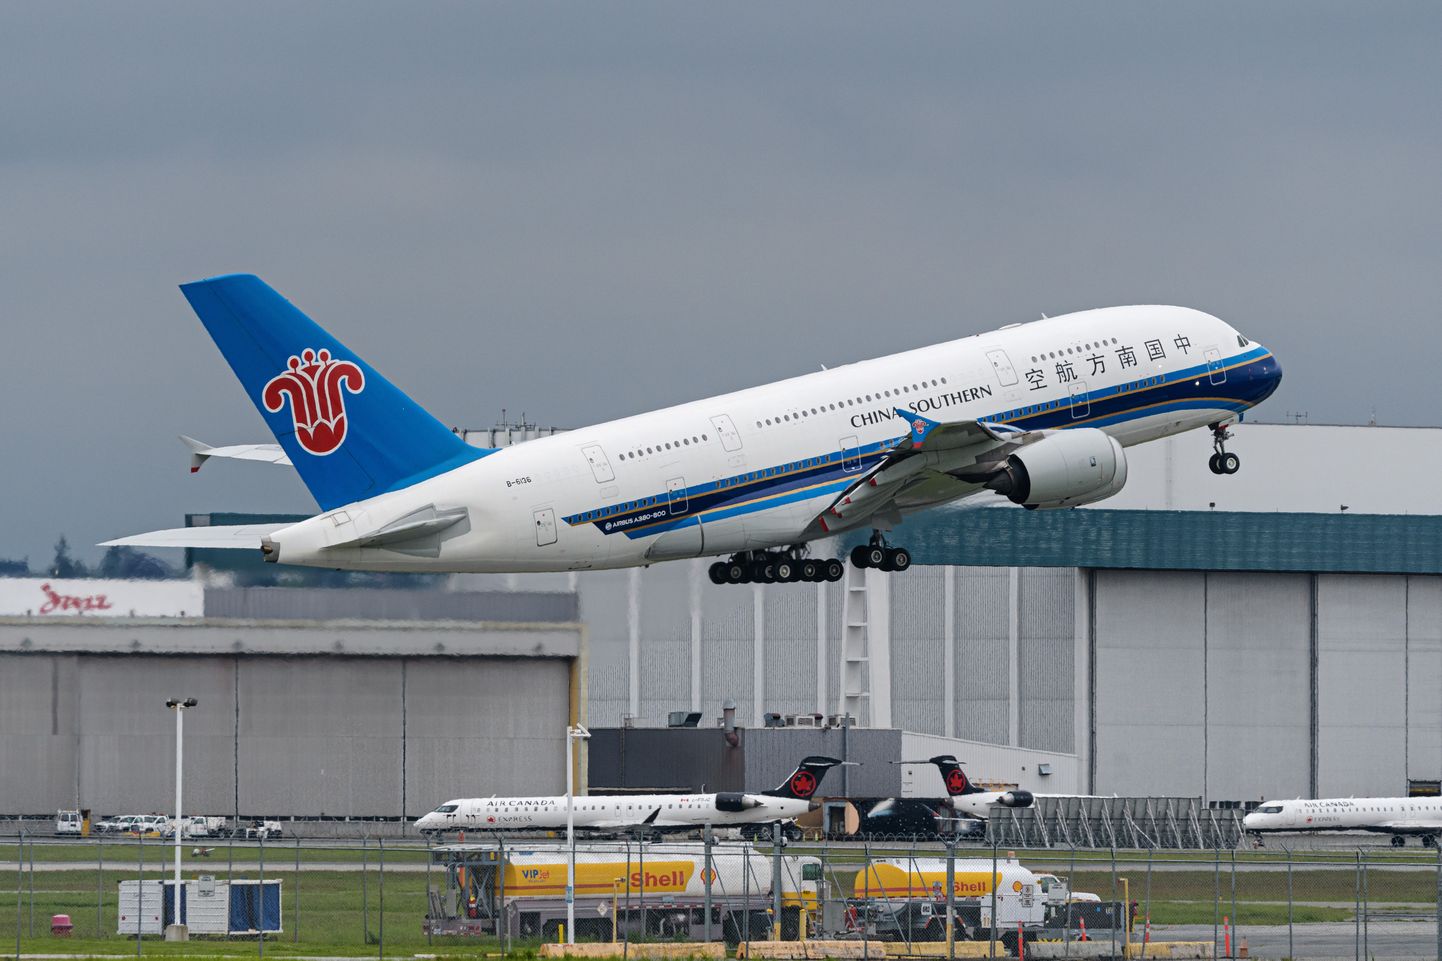 China Southern Airlines reisilennuk Airbus A380-841 startimas Vancouverist Guangzhousse. Foto on illustratiivne.